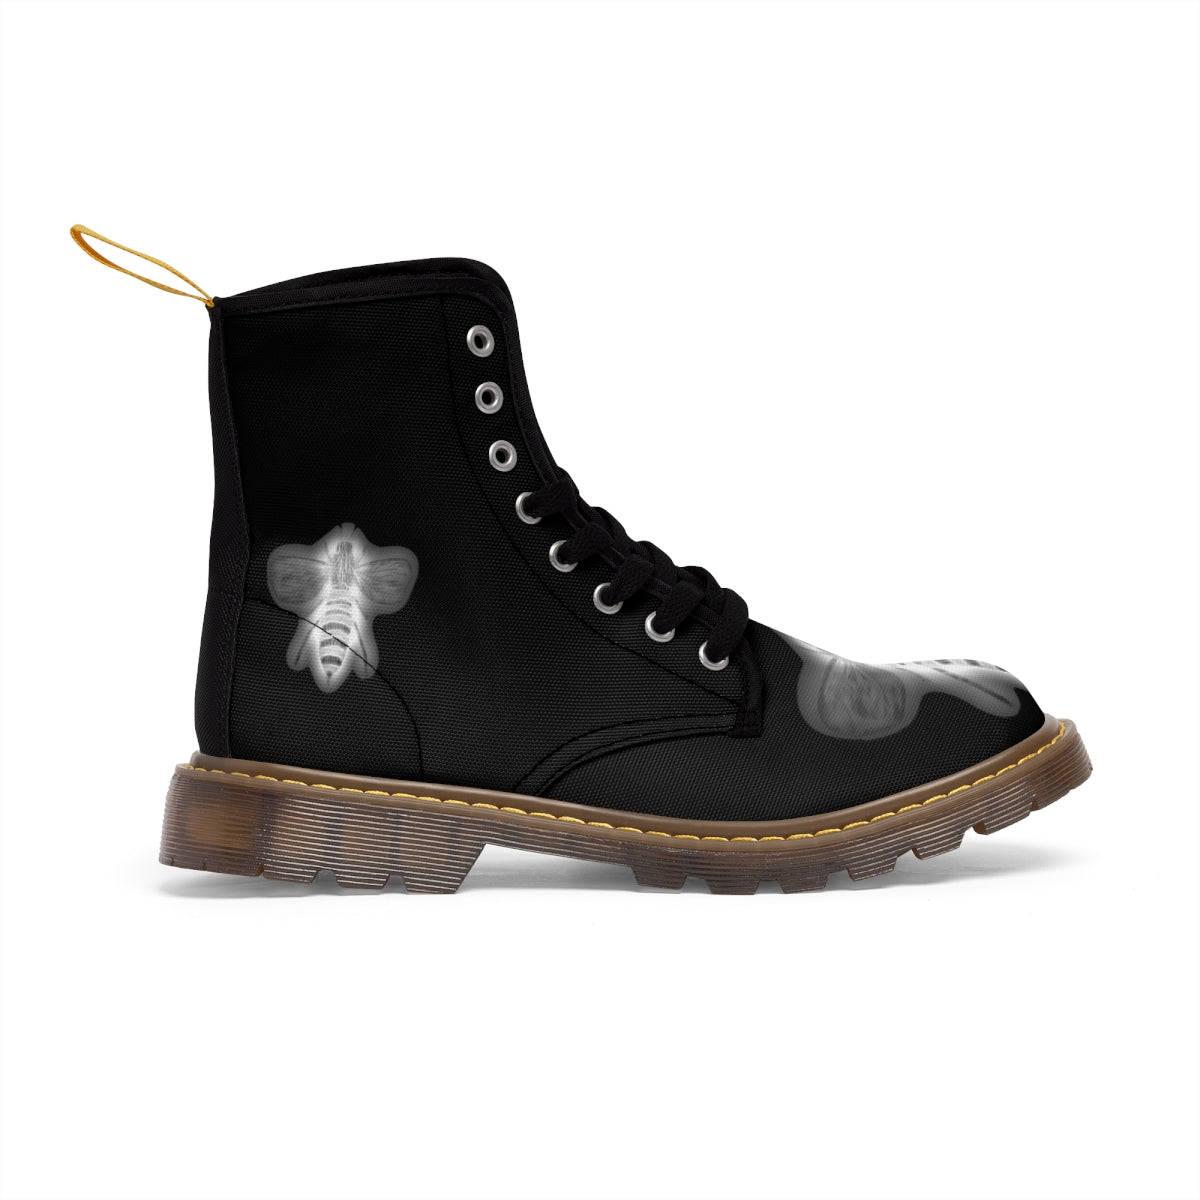 Negative Bee Women's Black Canvas Boots Shoes Bee boots combat boots fun womens boots original art boots Shoes unique womens boots vegan boots vegan combat boots womens black boots womens boots womens fashion boots